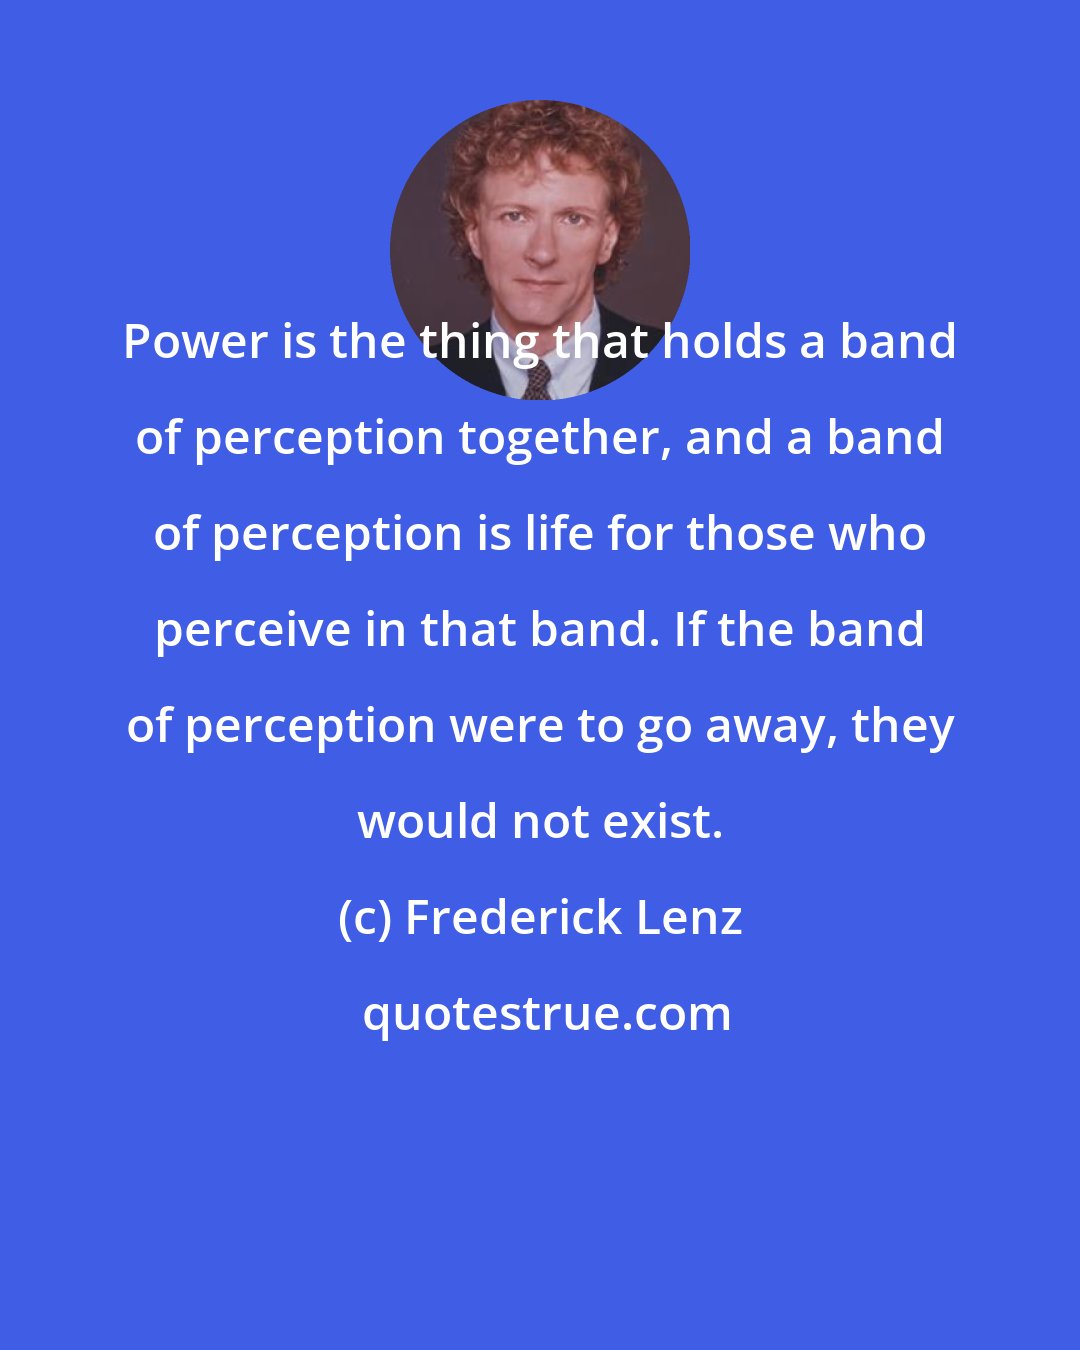 Frederick Lenz: Power is the thing that holds a band of perception together, and a band of perception is life for those who perceive in that band. If the band of perception were to go away, they would not exist.